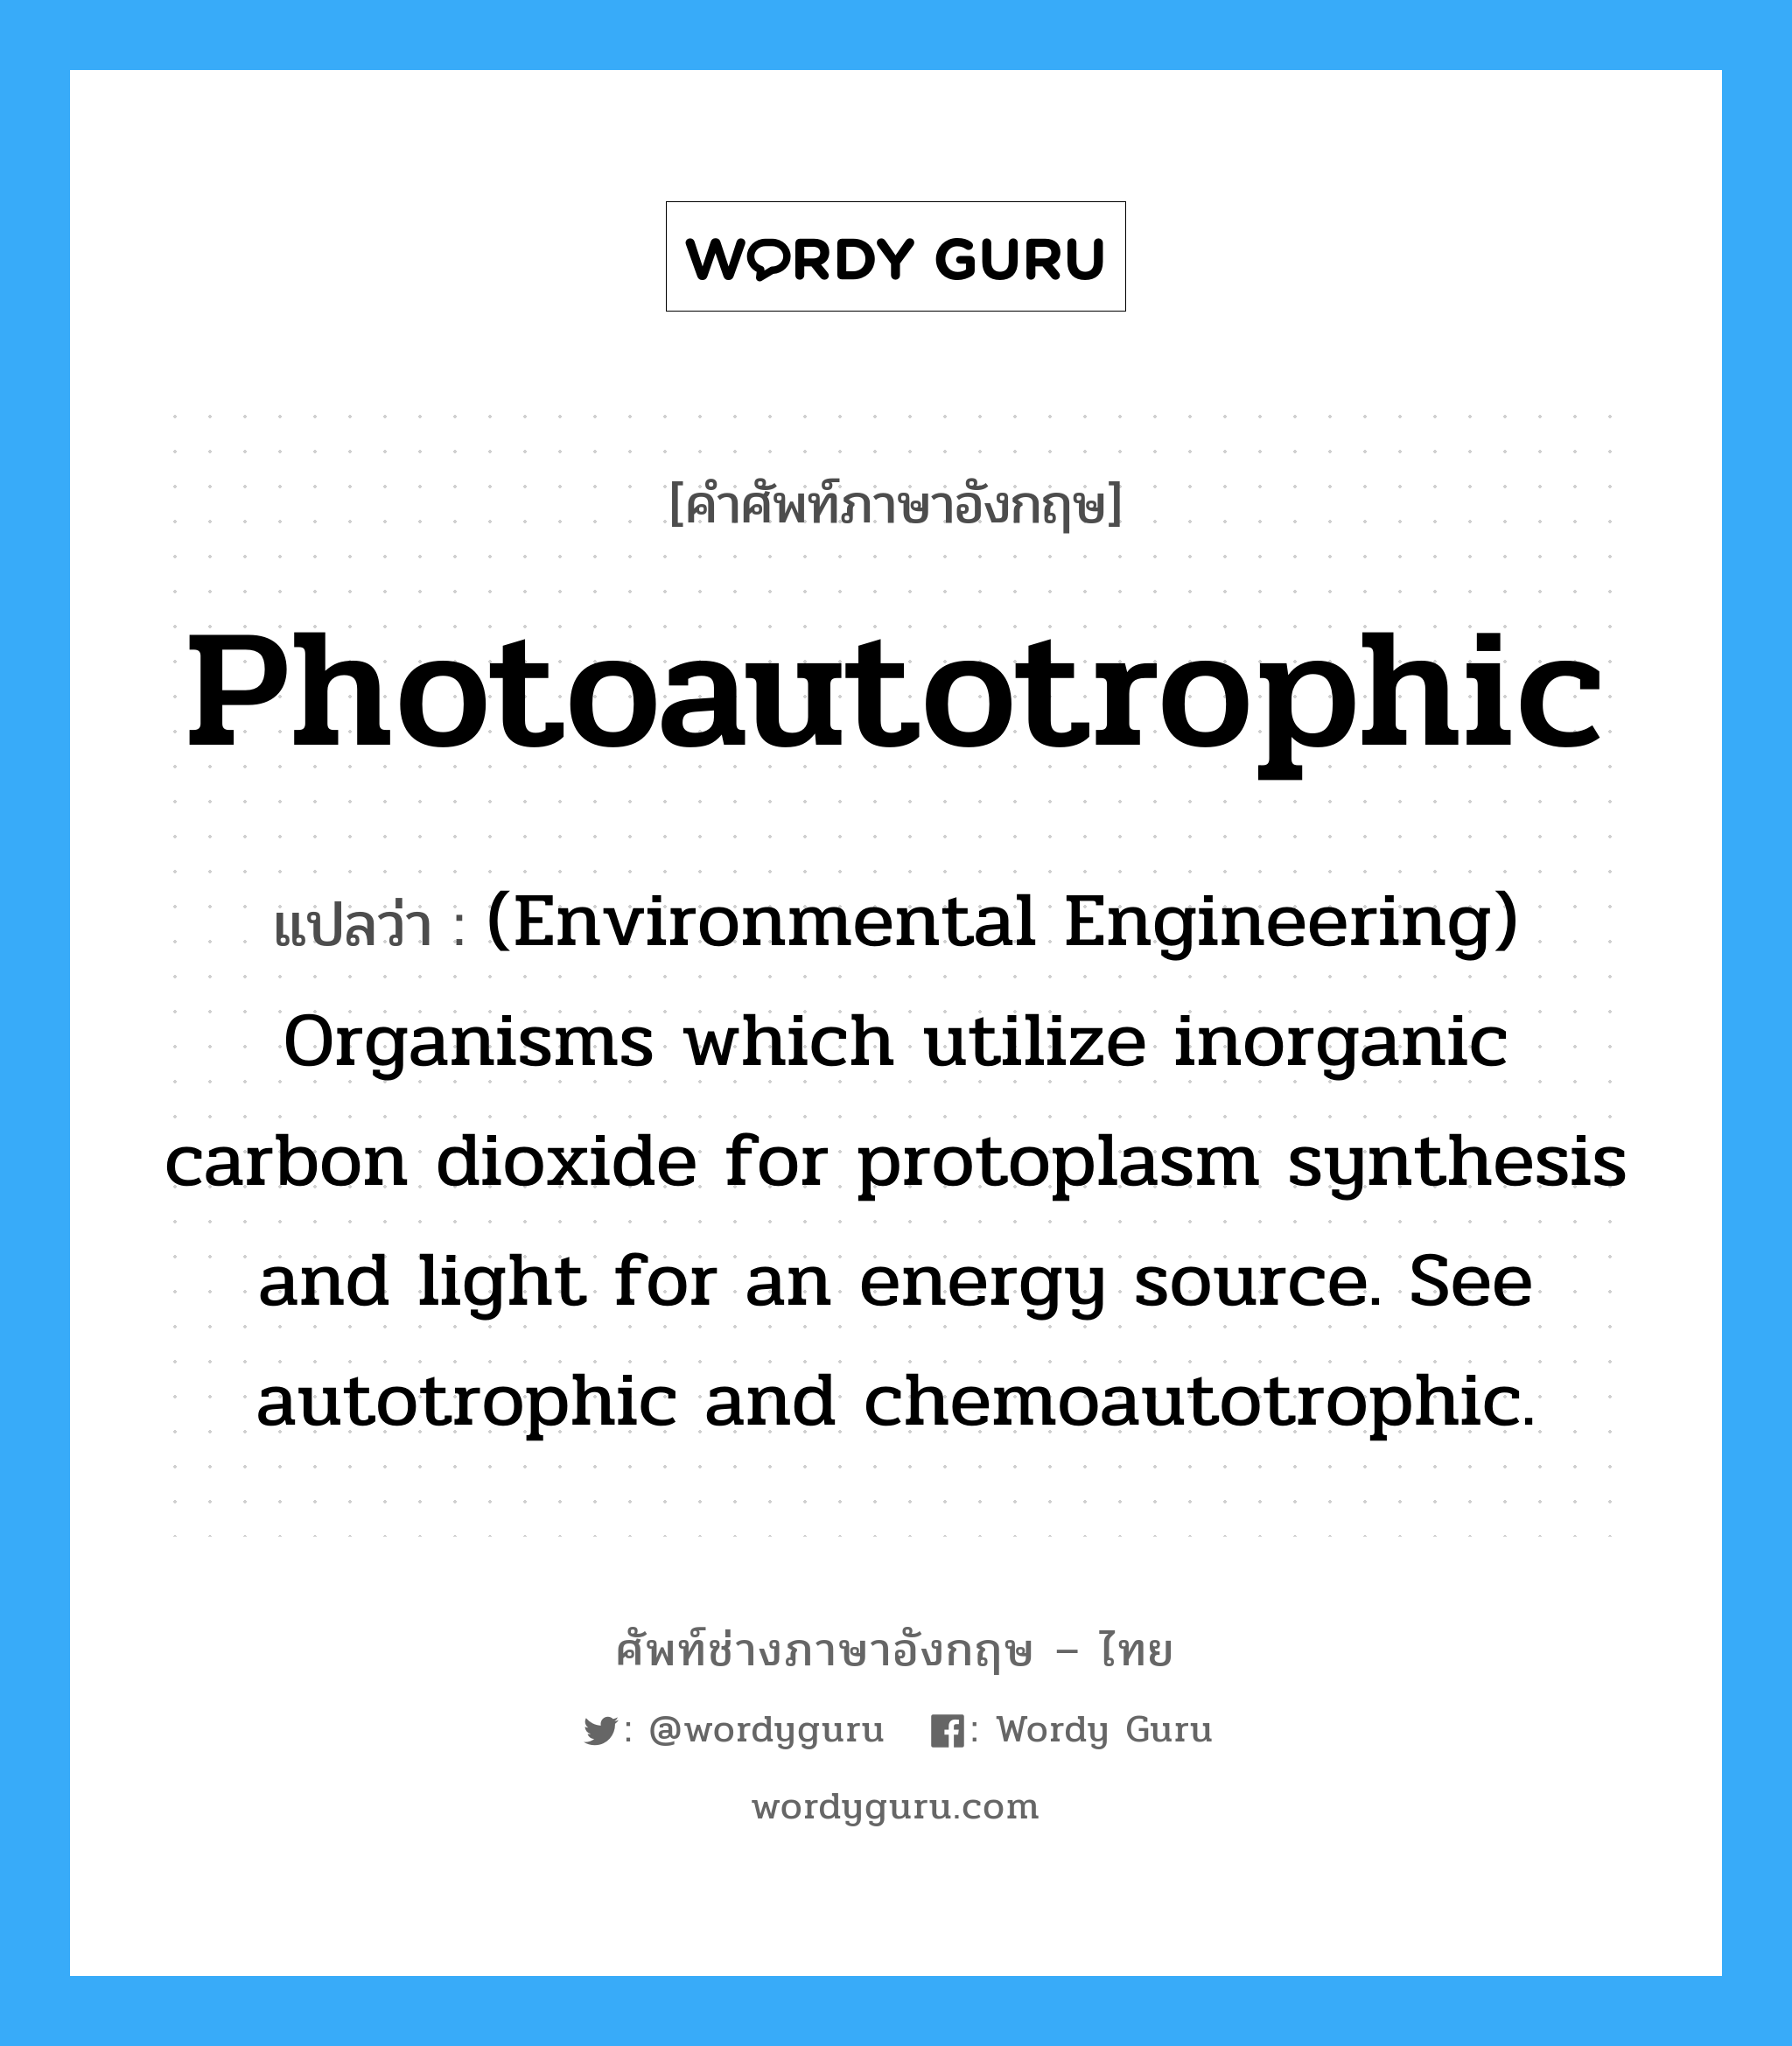 (Environmental Engineering) Organisms which utilize inorganic carbon dioxide for protoplasm synthesis and light for an energy source. See autotrophic and chemoautotrophic. ภาษาอังกฤษ?, คำศัพท์ช่างภาษาอังกฤษ - ไทย (Environmental Engineering) Organisms which utilize inorganic carbon dioxide for protoplasm synthesis and light for an energy source. See autotrophic and chemoautotrophic. คำศัพท์ภาษาอังกฤษ (Environmental Engineering) Organisms which utilize inorganic carbon dioxide for protoplasm synthesis and light for an energy source. See autotrophic and chemoautotrophic. แปลว่า Photoautotrophic